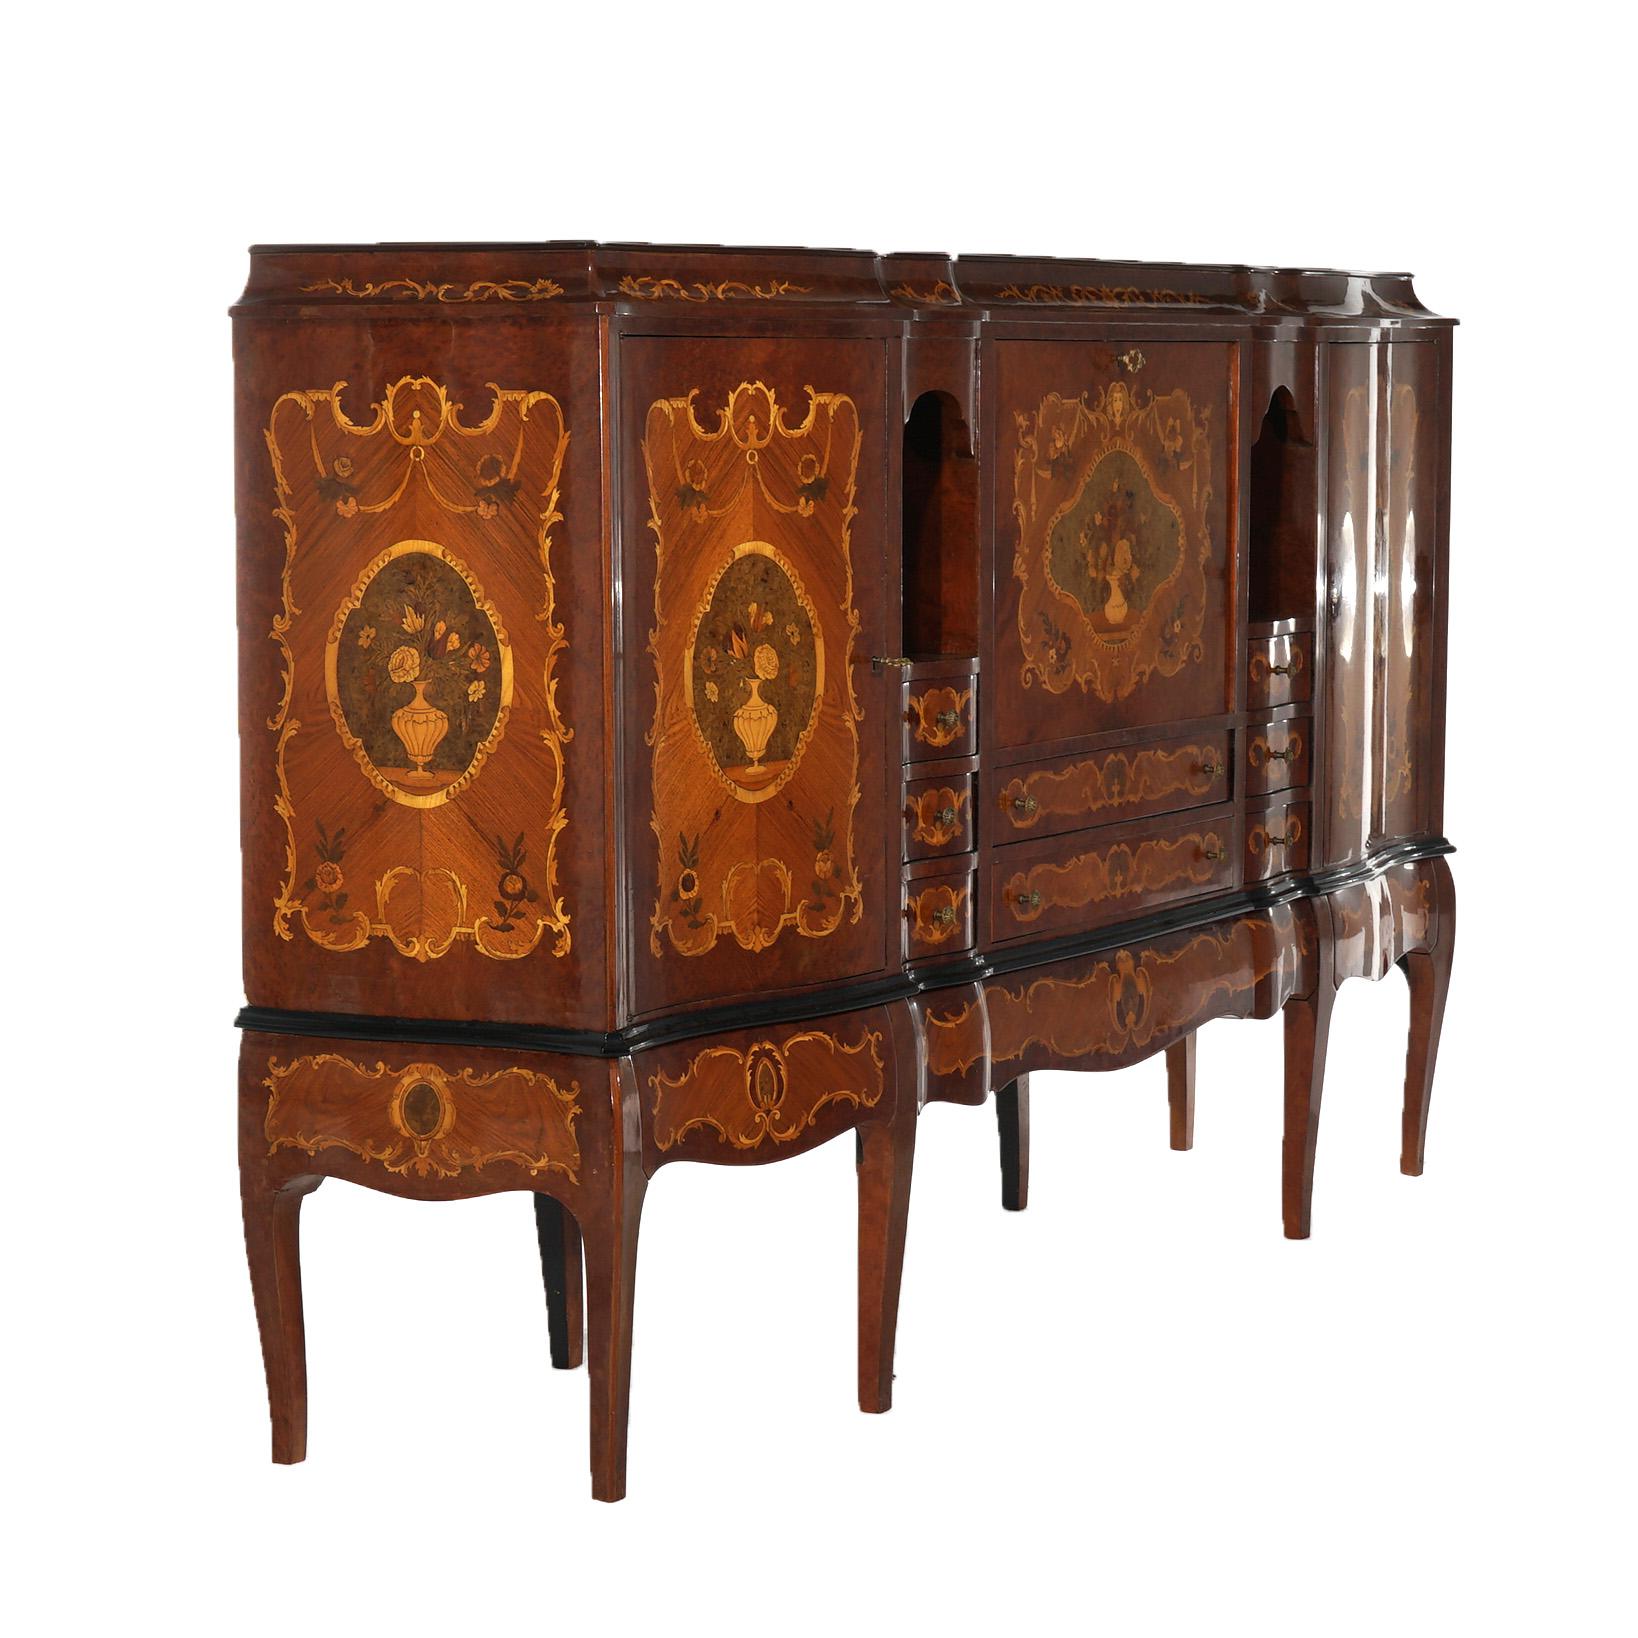 Antique French Kingwood Satinwood & Burlwood Marquetry Inlaid Sideboard C1930 For Sale 3